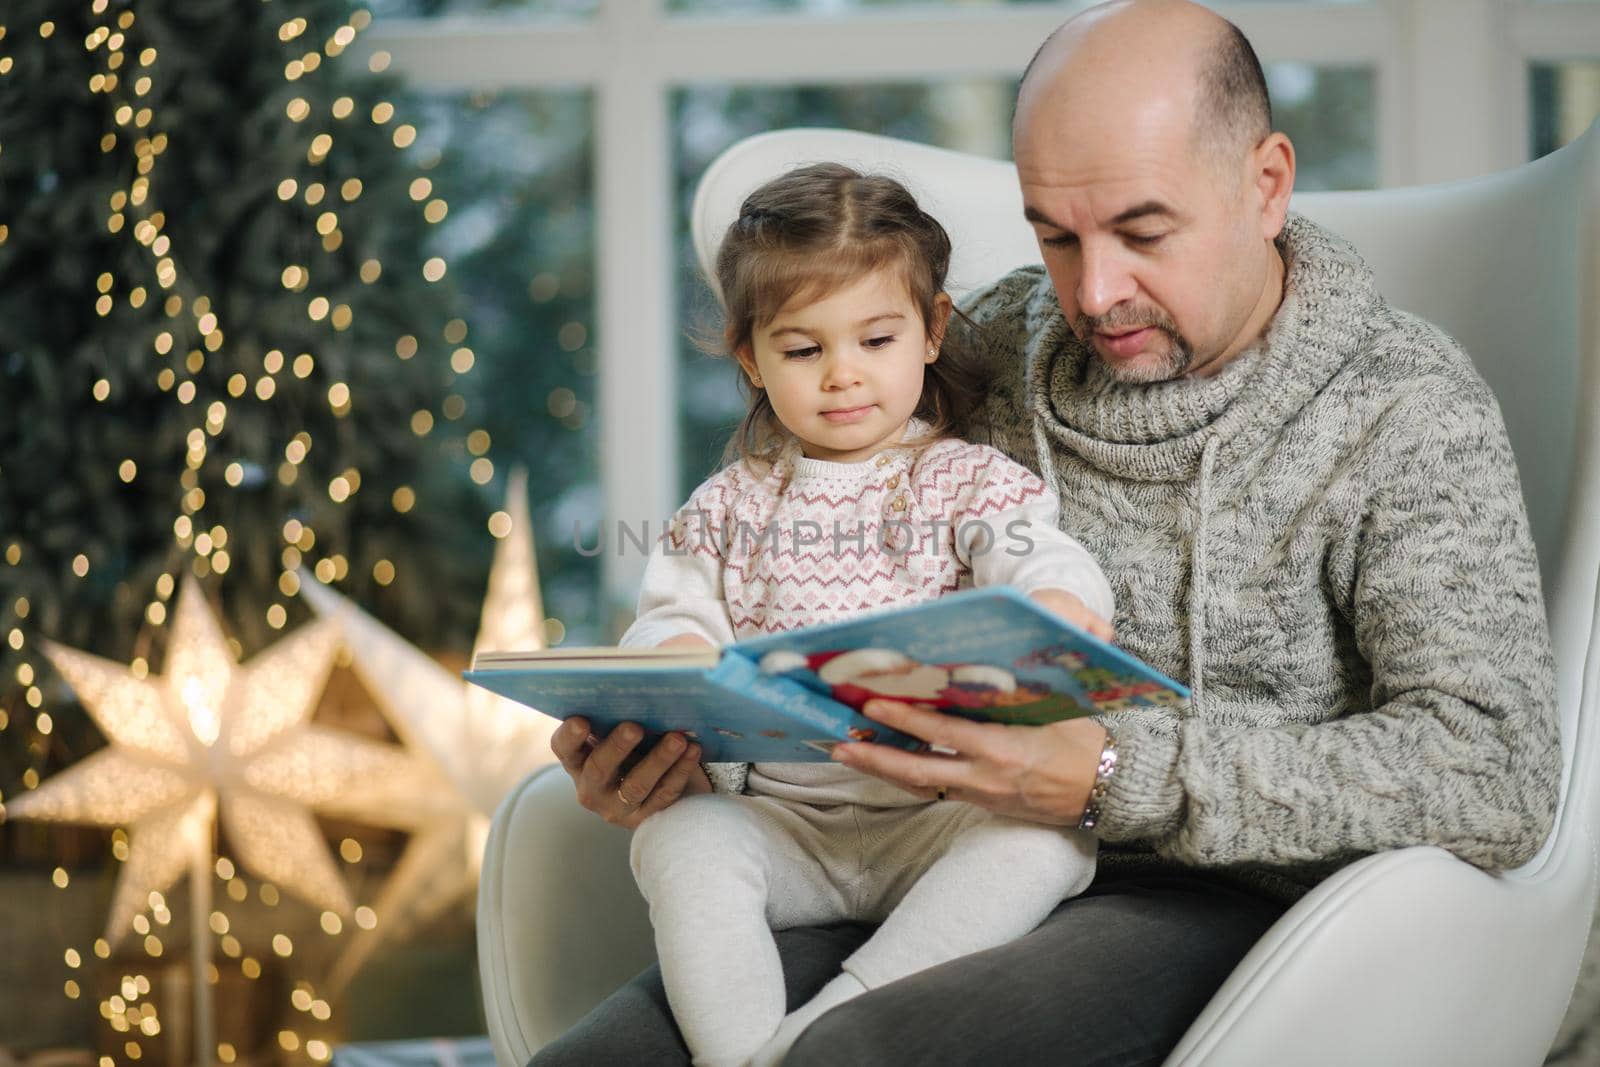 Young grandfather play and read book with her adorable grandaugher nea fir tree. Christmas mood.